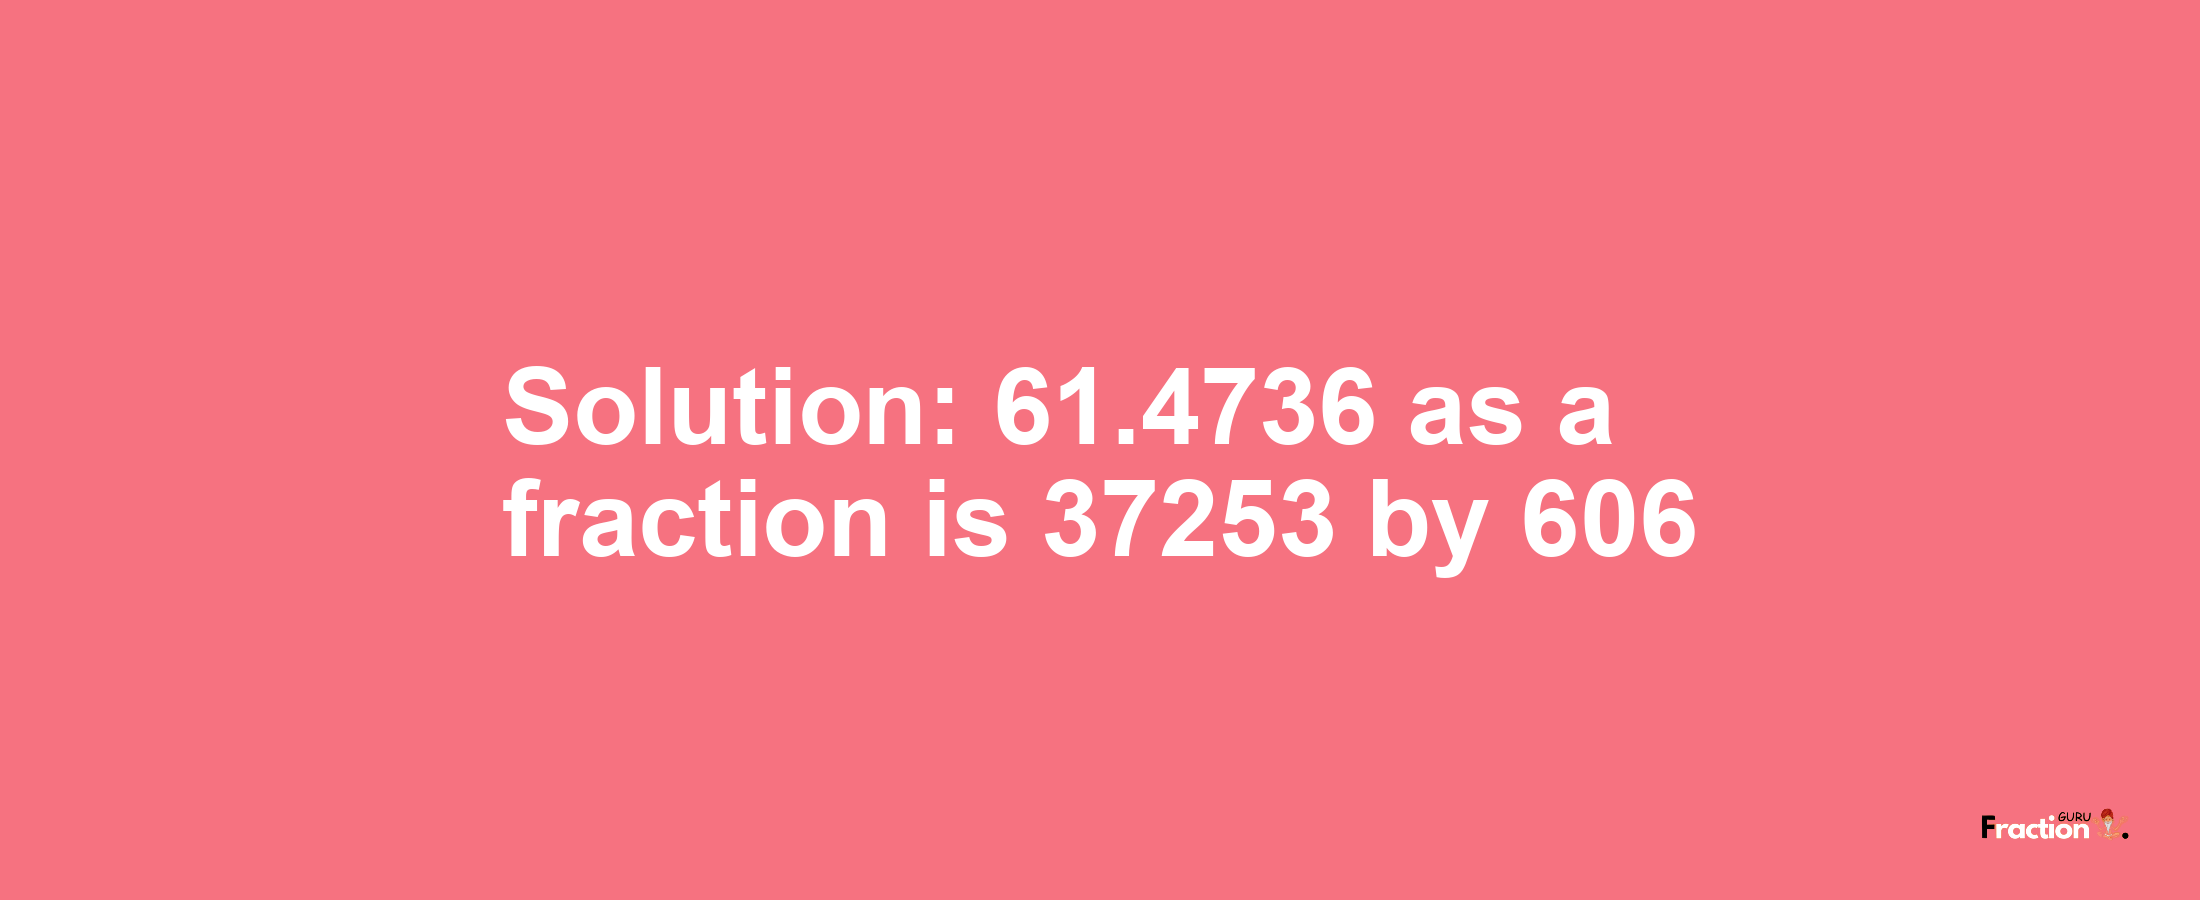 Solution:61.4736 as a fraction is 37253/606